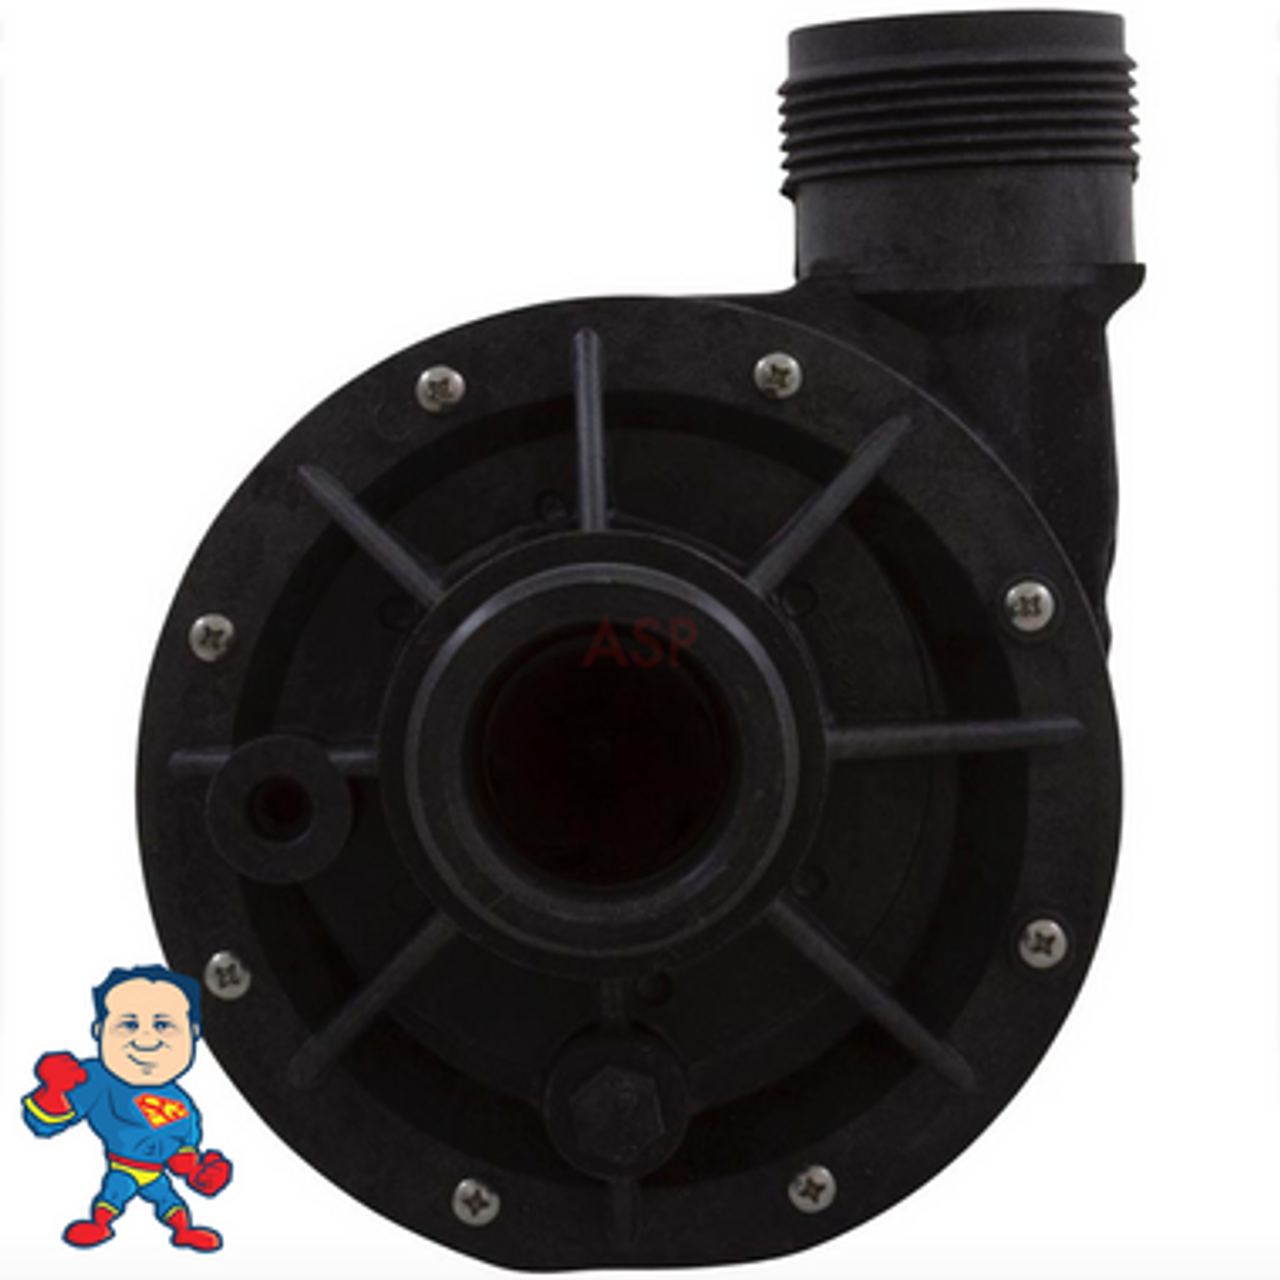 Circ-Master, Pump, Wet End, Aqua-Flo, CMHP, 1/15th , 1-1/2", 48 frame, 0.6A/230V, 1.3A/115v 
The Suction and Pressure sides both Measure about 2-3/8" Across the threads and is called 1 ½”!